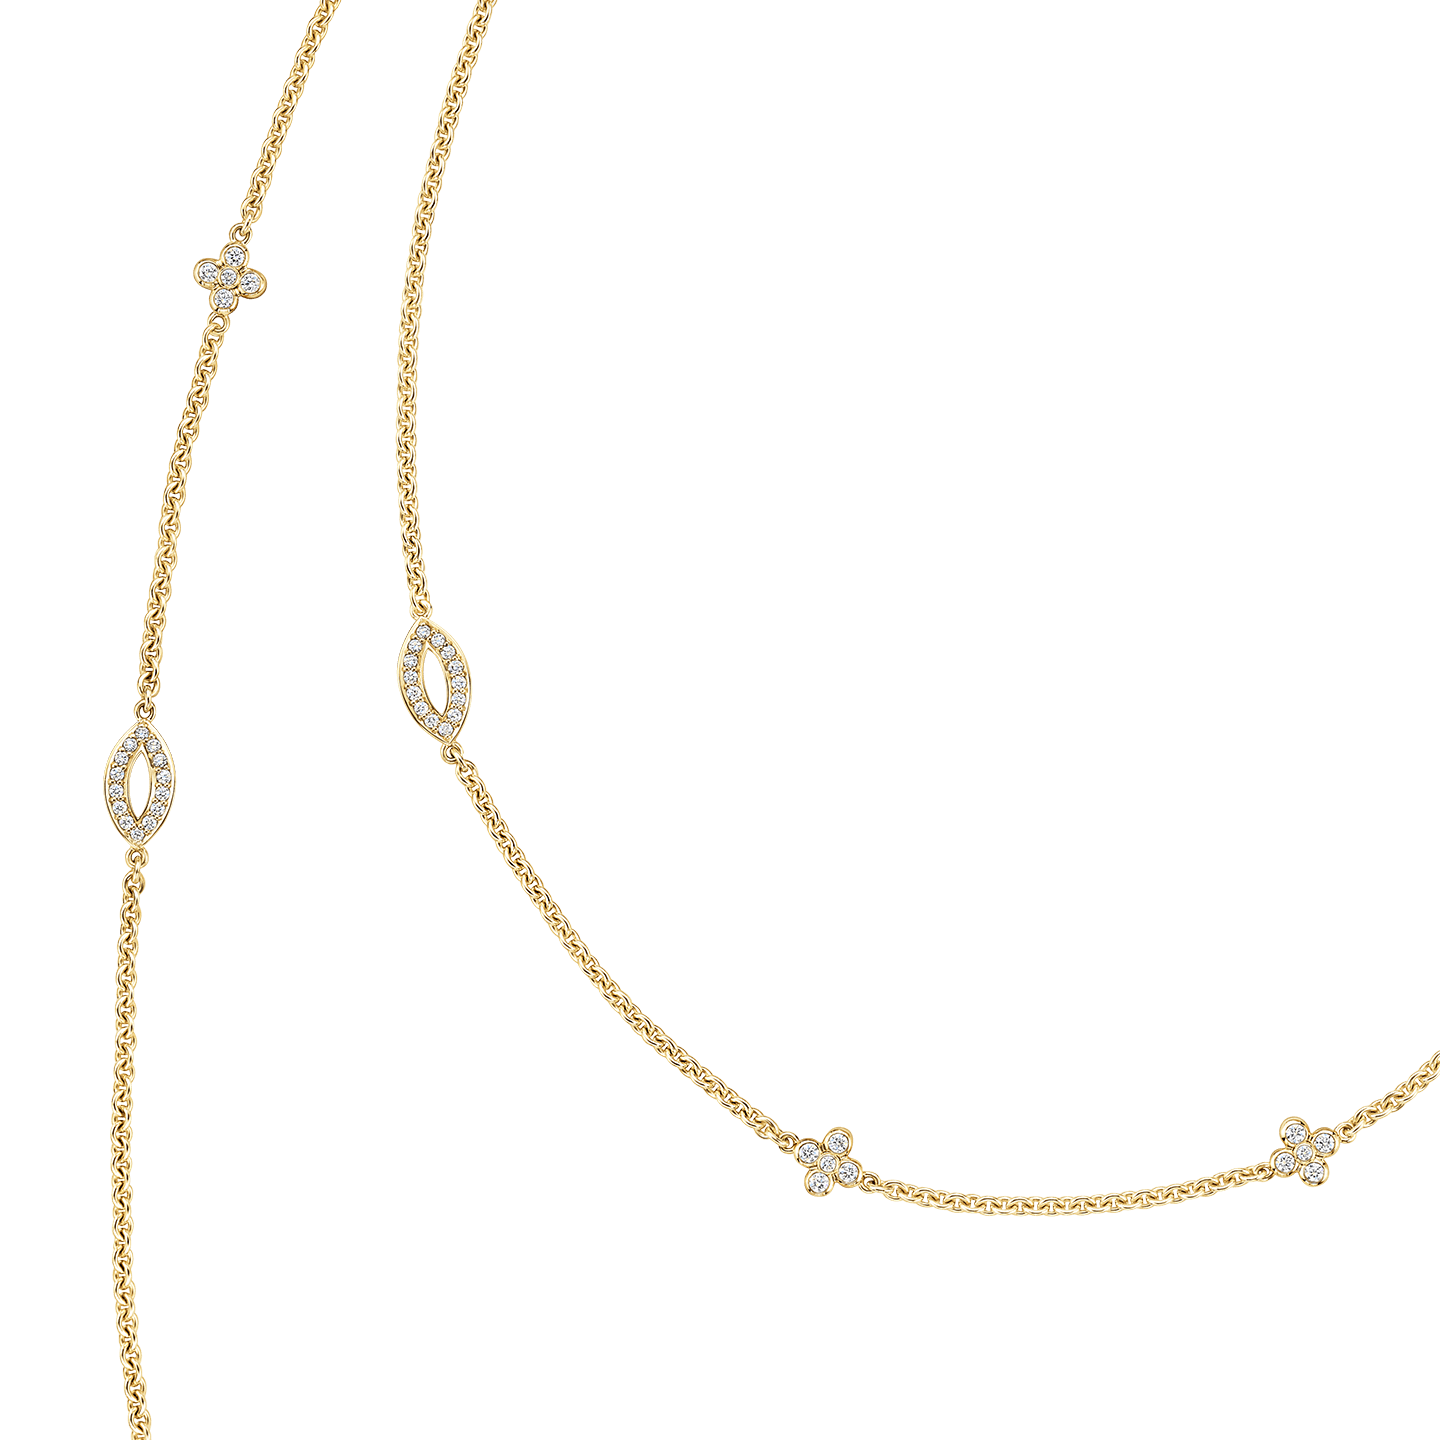 Lily Cluster Diamond Sautoir Necklace in Yellow Gold, Product Image 2